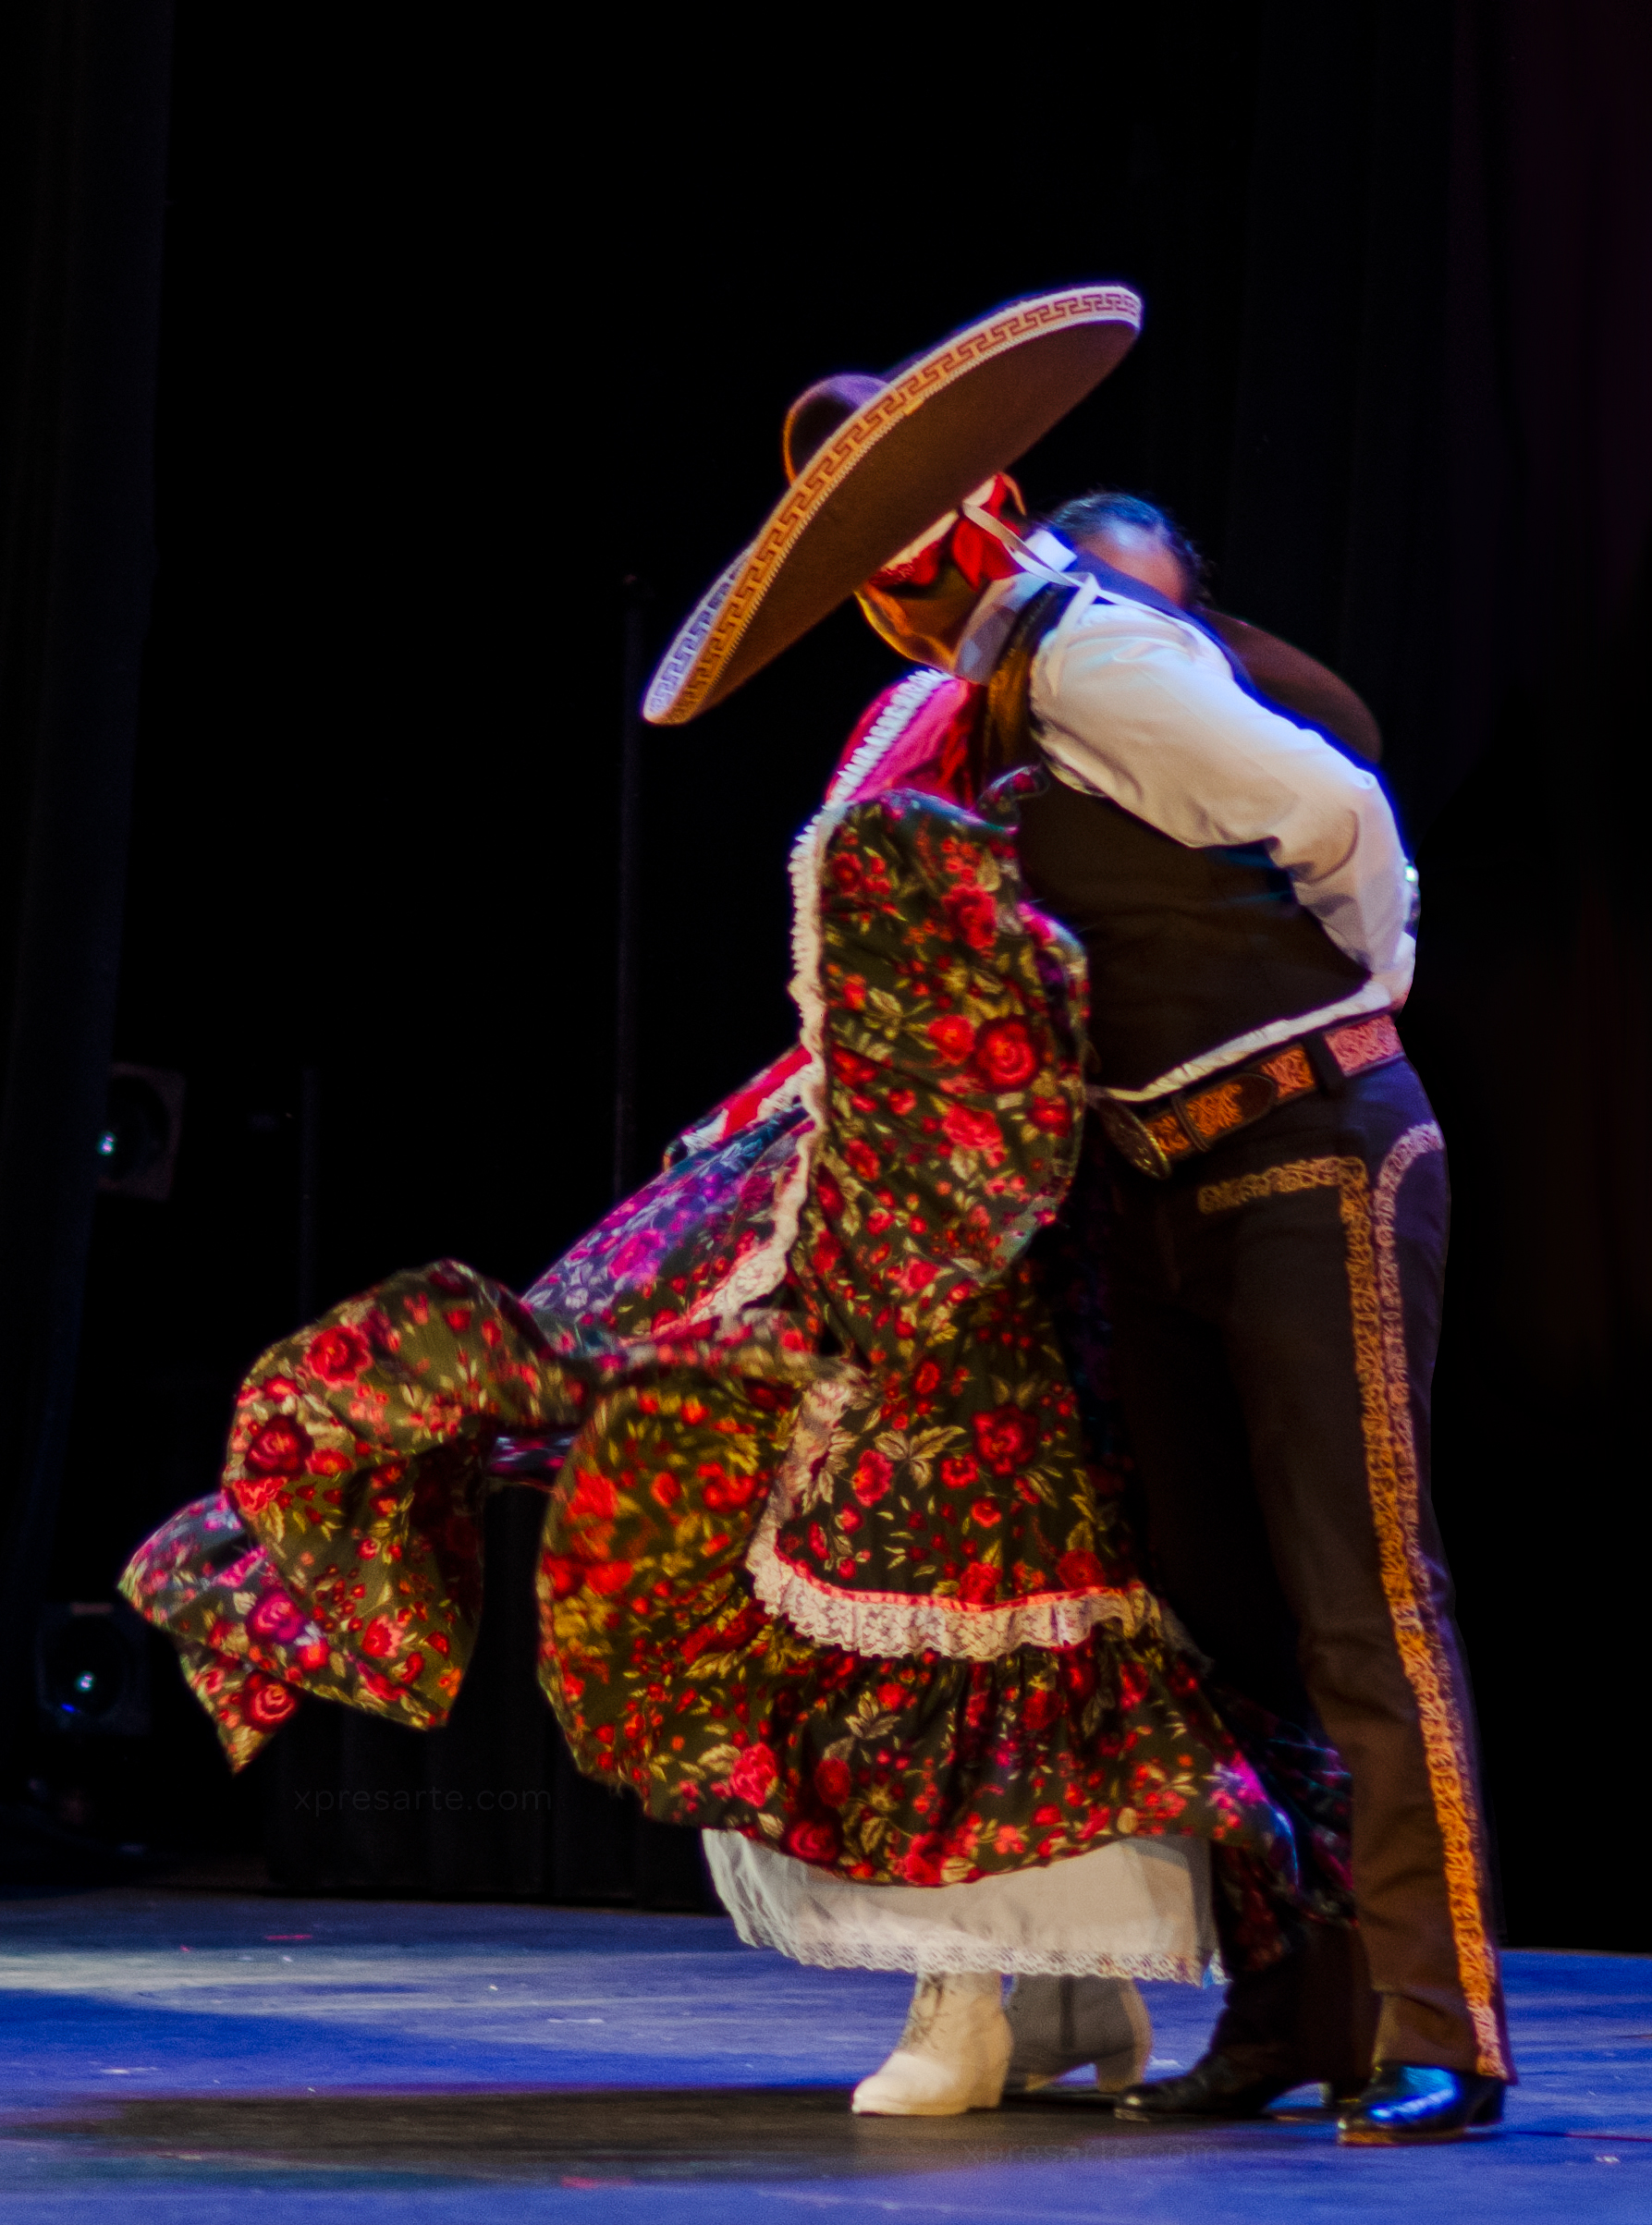 A Mexican Charro leans in to pretend kiss a Mexican girl as her skirt floats in the air at the end of a dance number